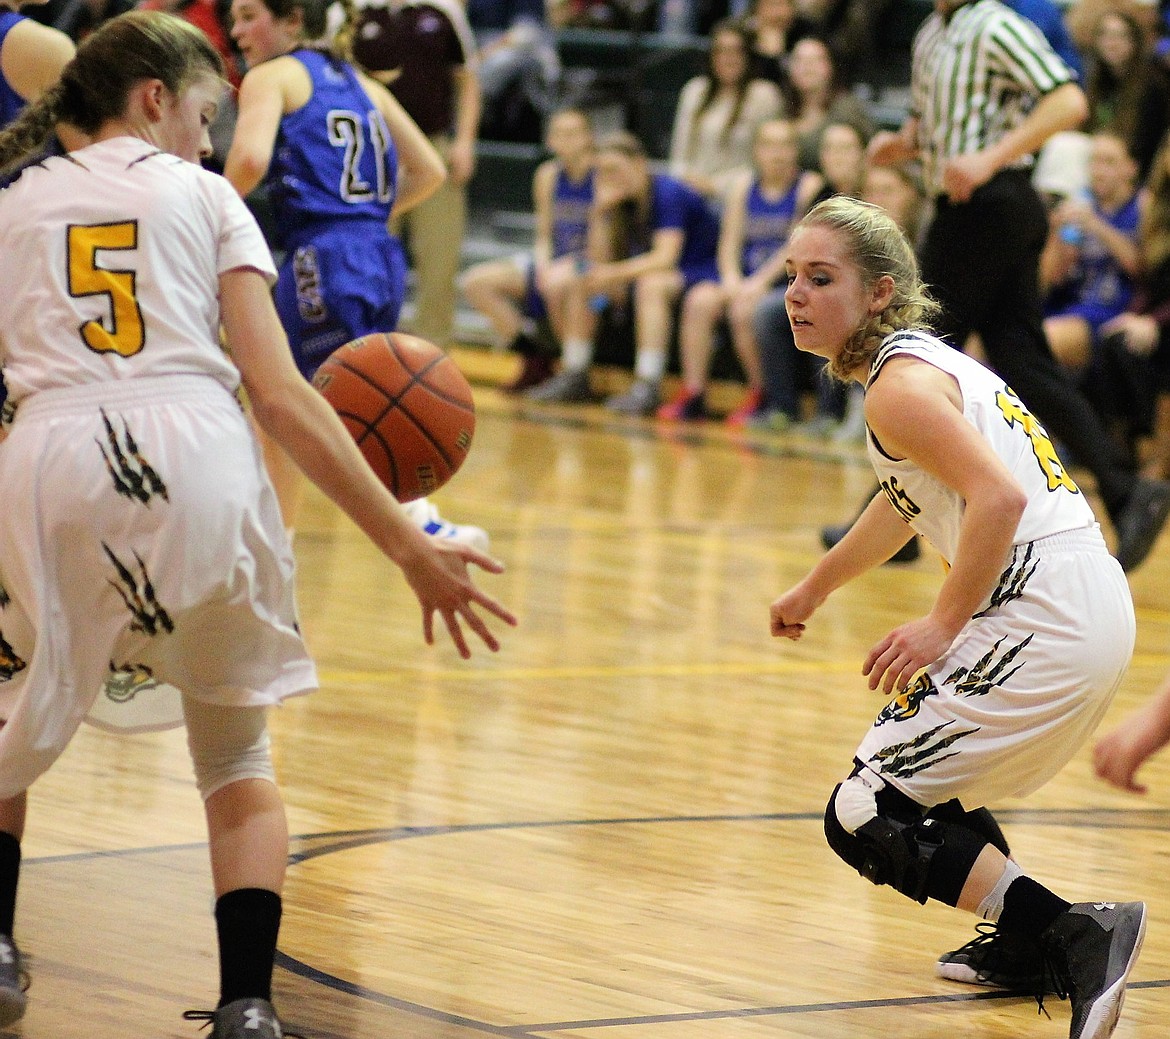 St. Regis #10 Madison Hill led her team in their win over Noxon with 17 points in Friday&#146;s game in St. Regis. No. 5 Madison Kelly put another eight points on the board for the evening.